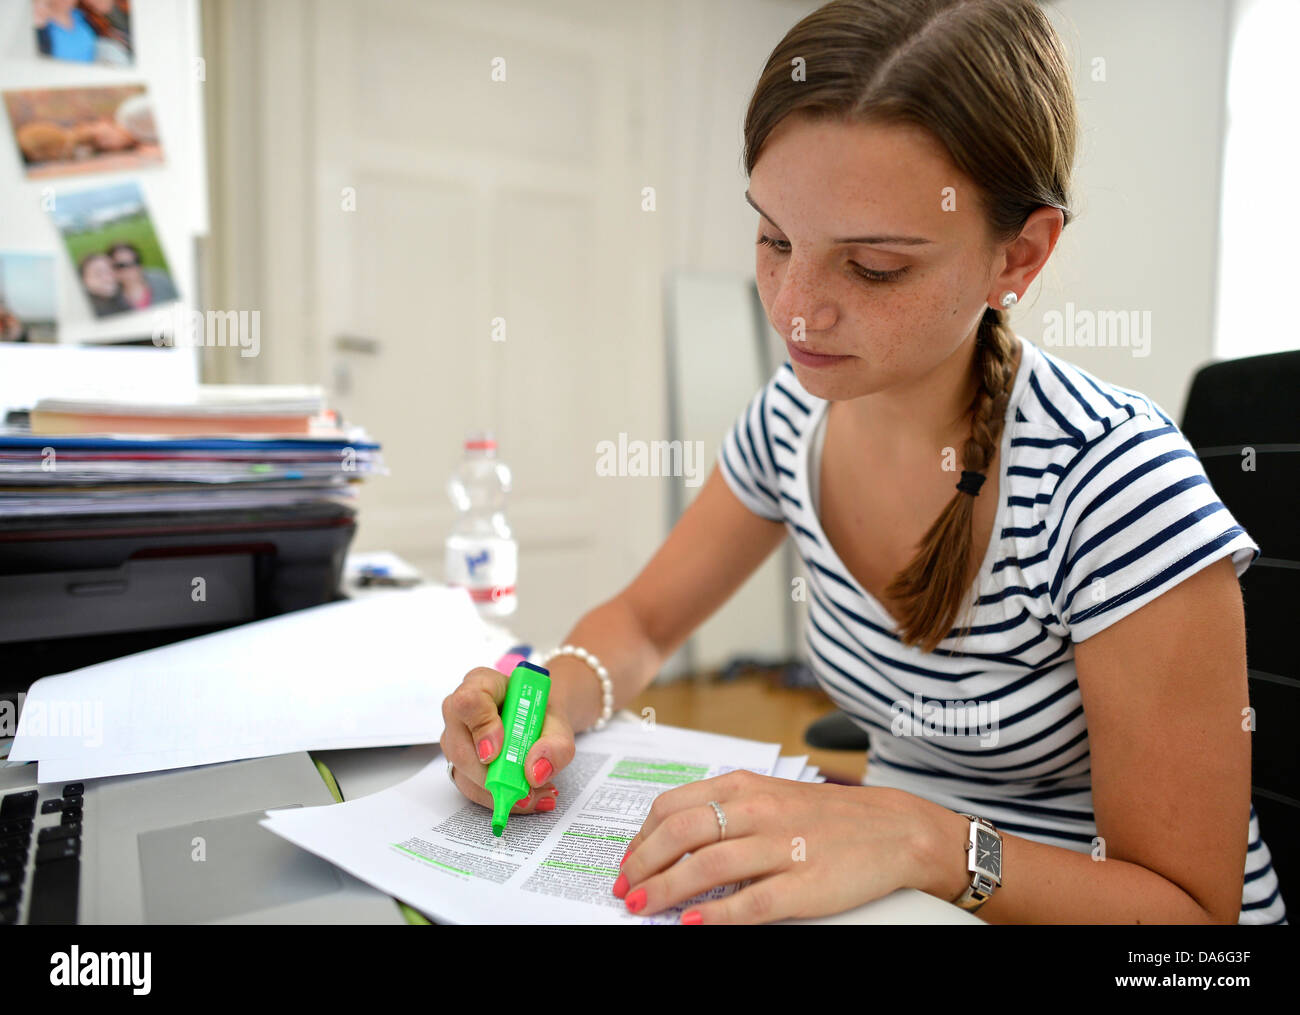 Student learning in a college dorm, using a highlighter Stock Photo